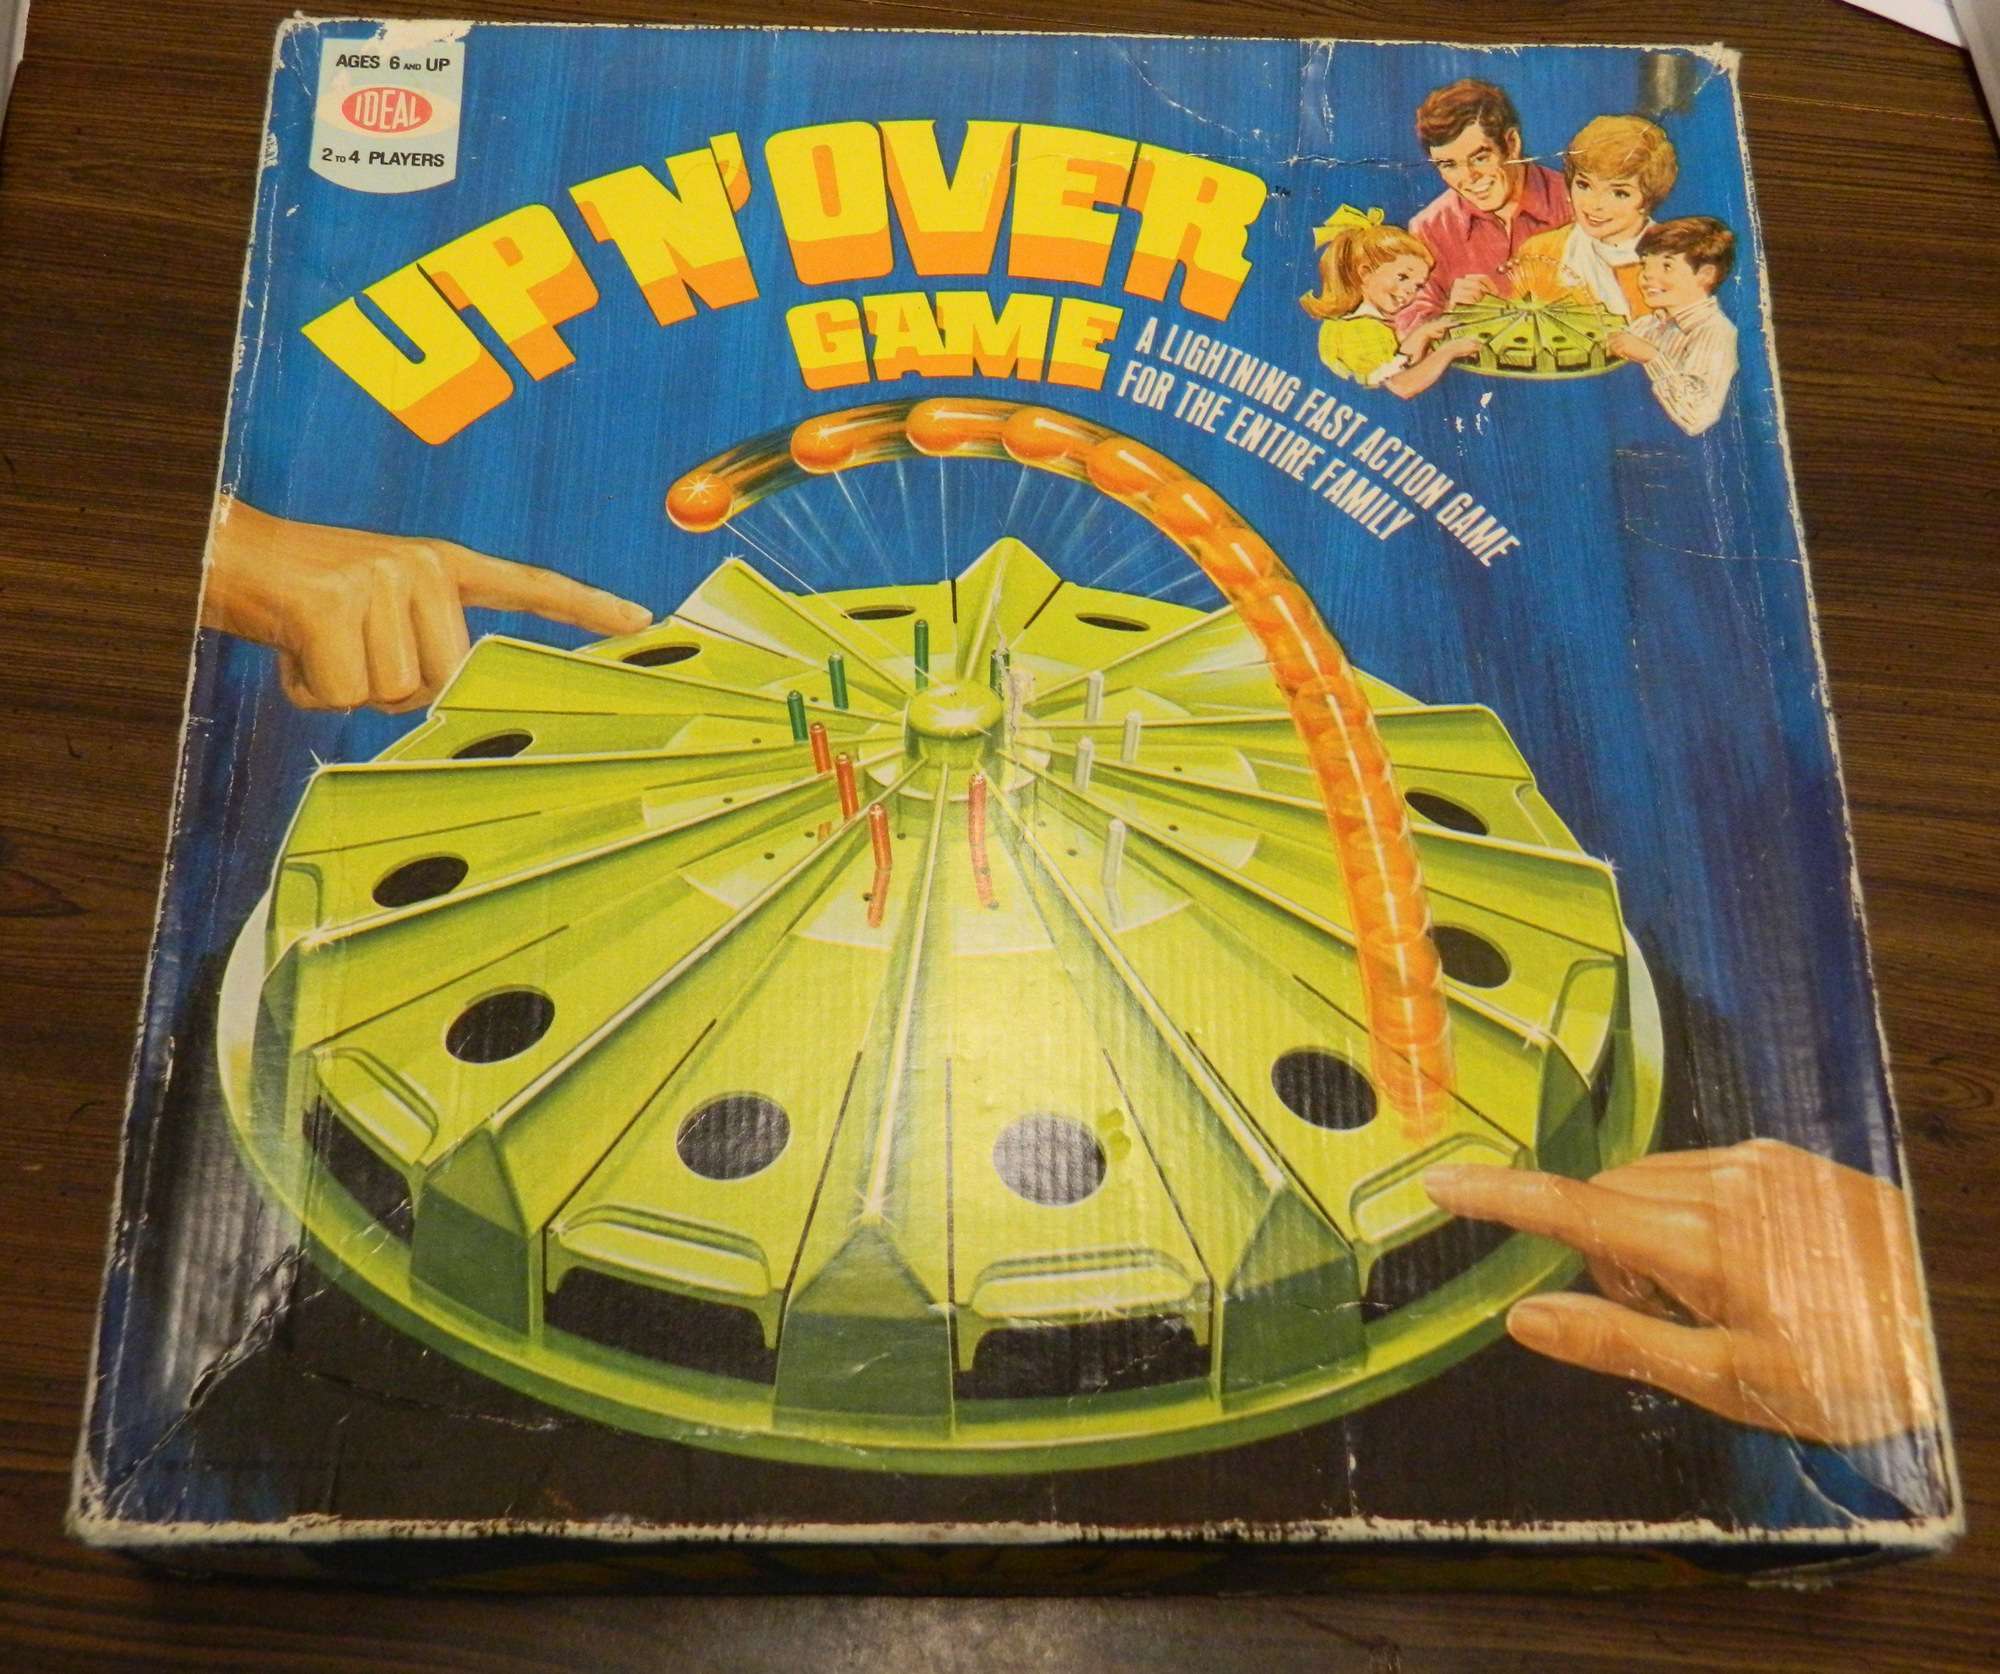 Up N’ Over Game Board Game Review and Instructions